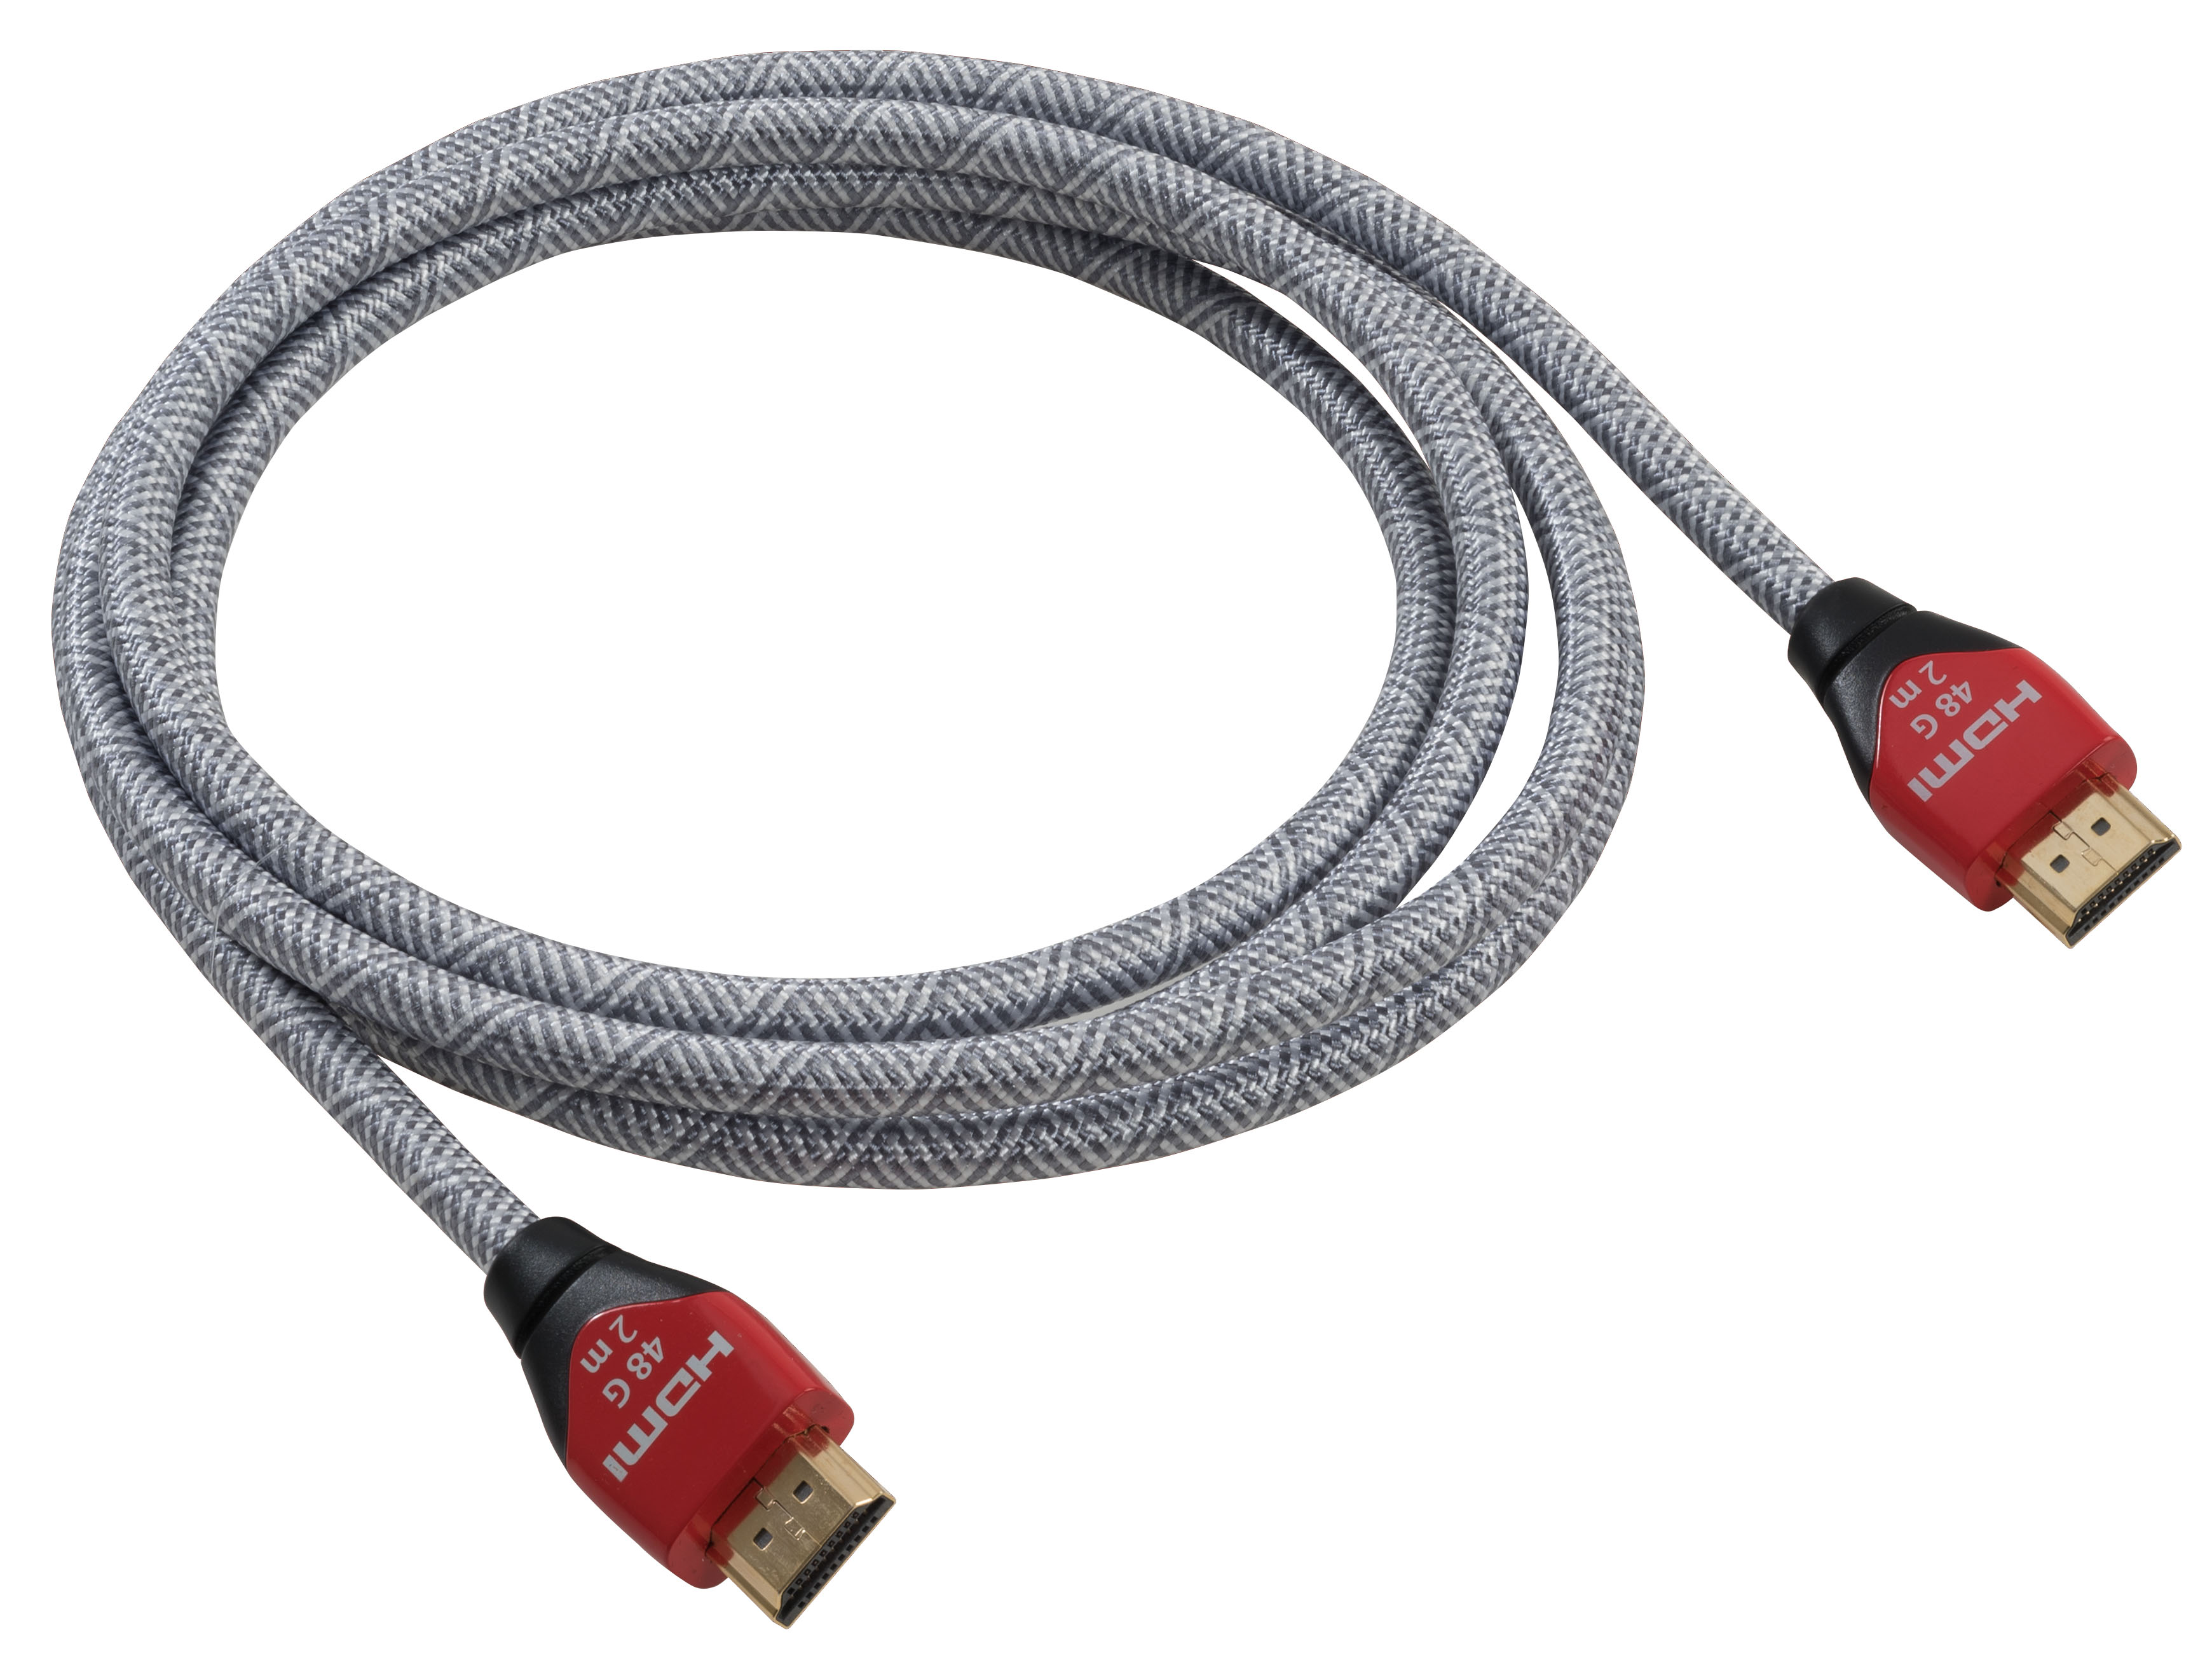 HDMI Cable 30M - Terminator Electrical Products Supplier